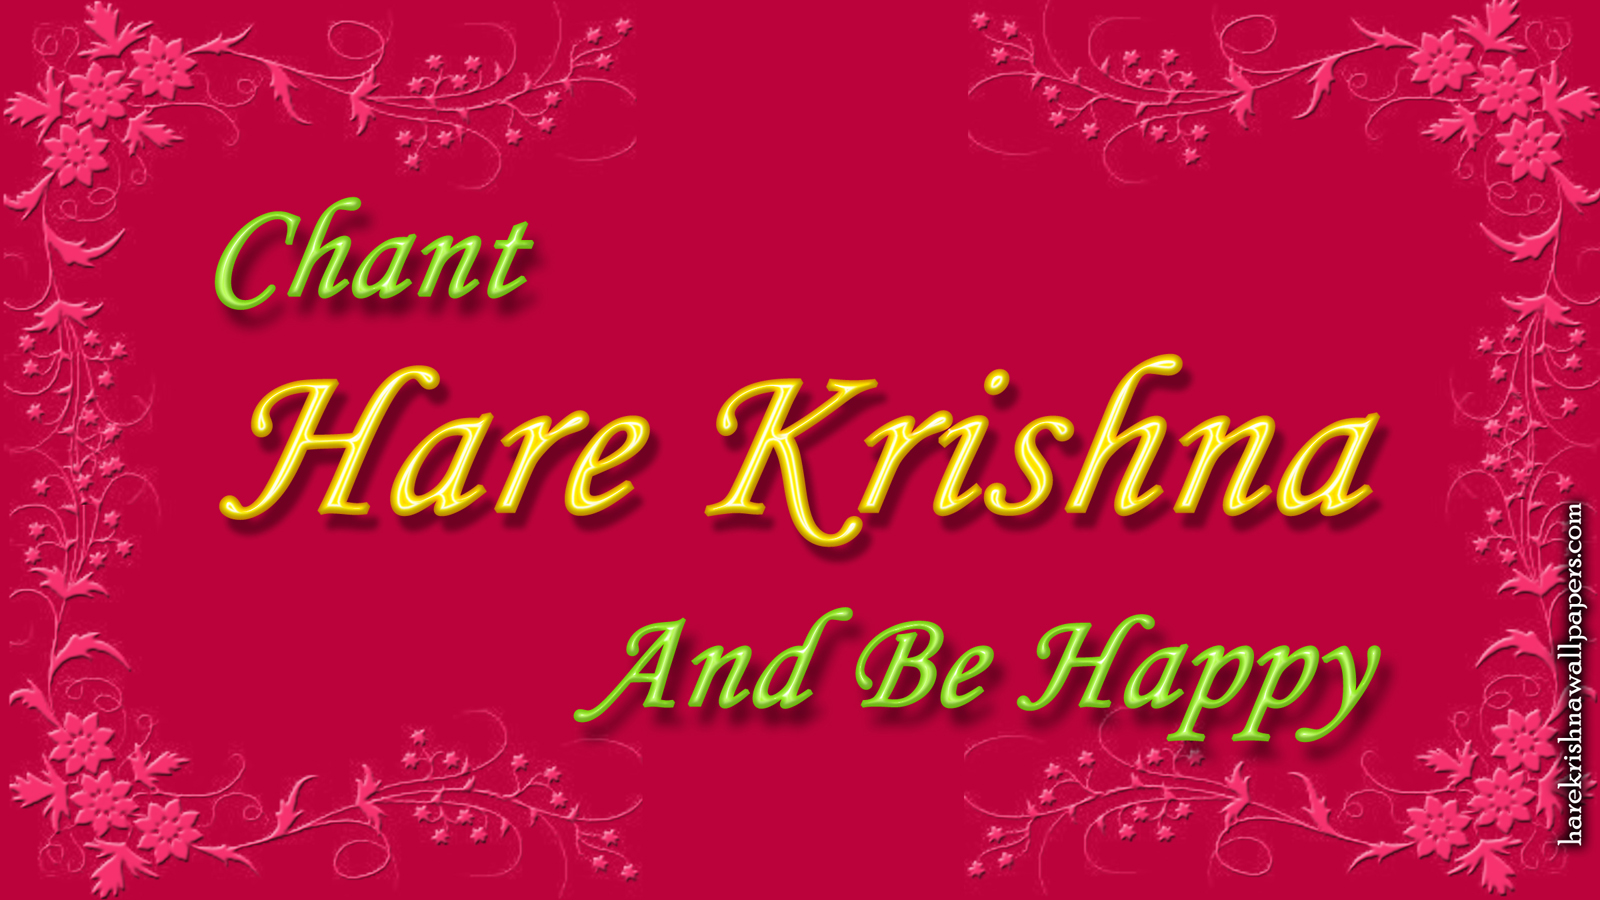 Chant Hare Krishna and be happy Wallpaper (008) Size 1600x900 Download